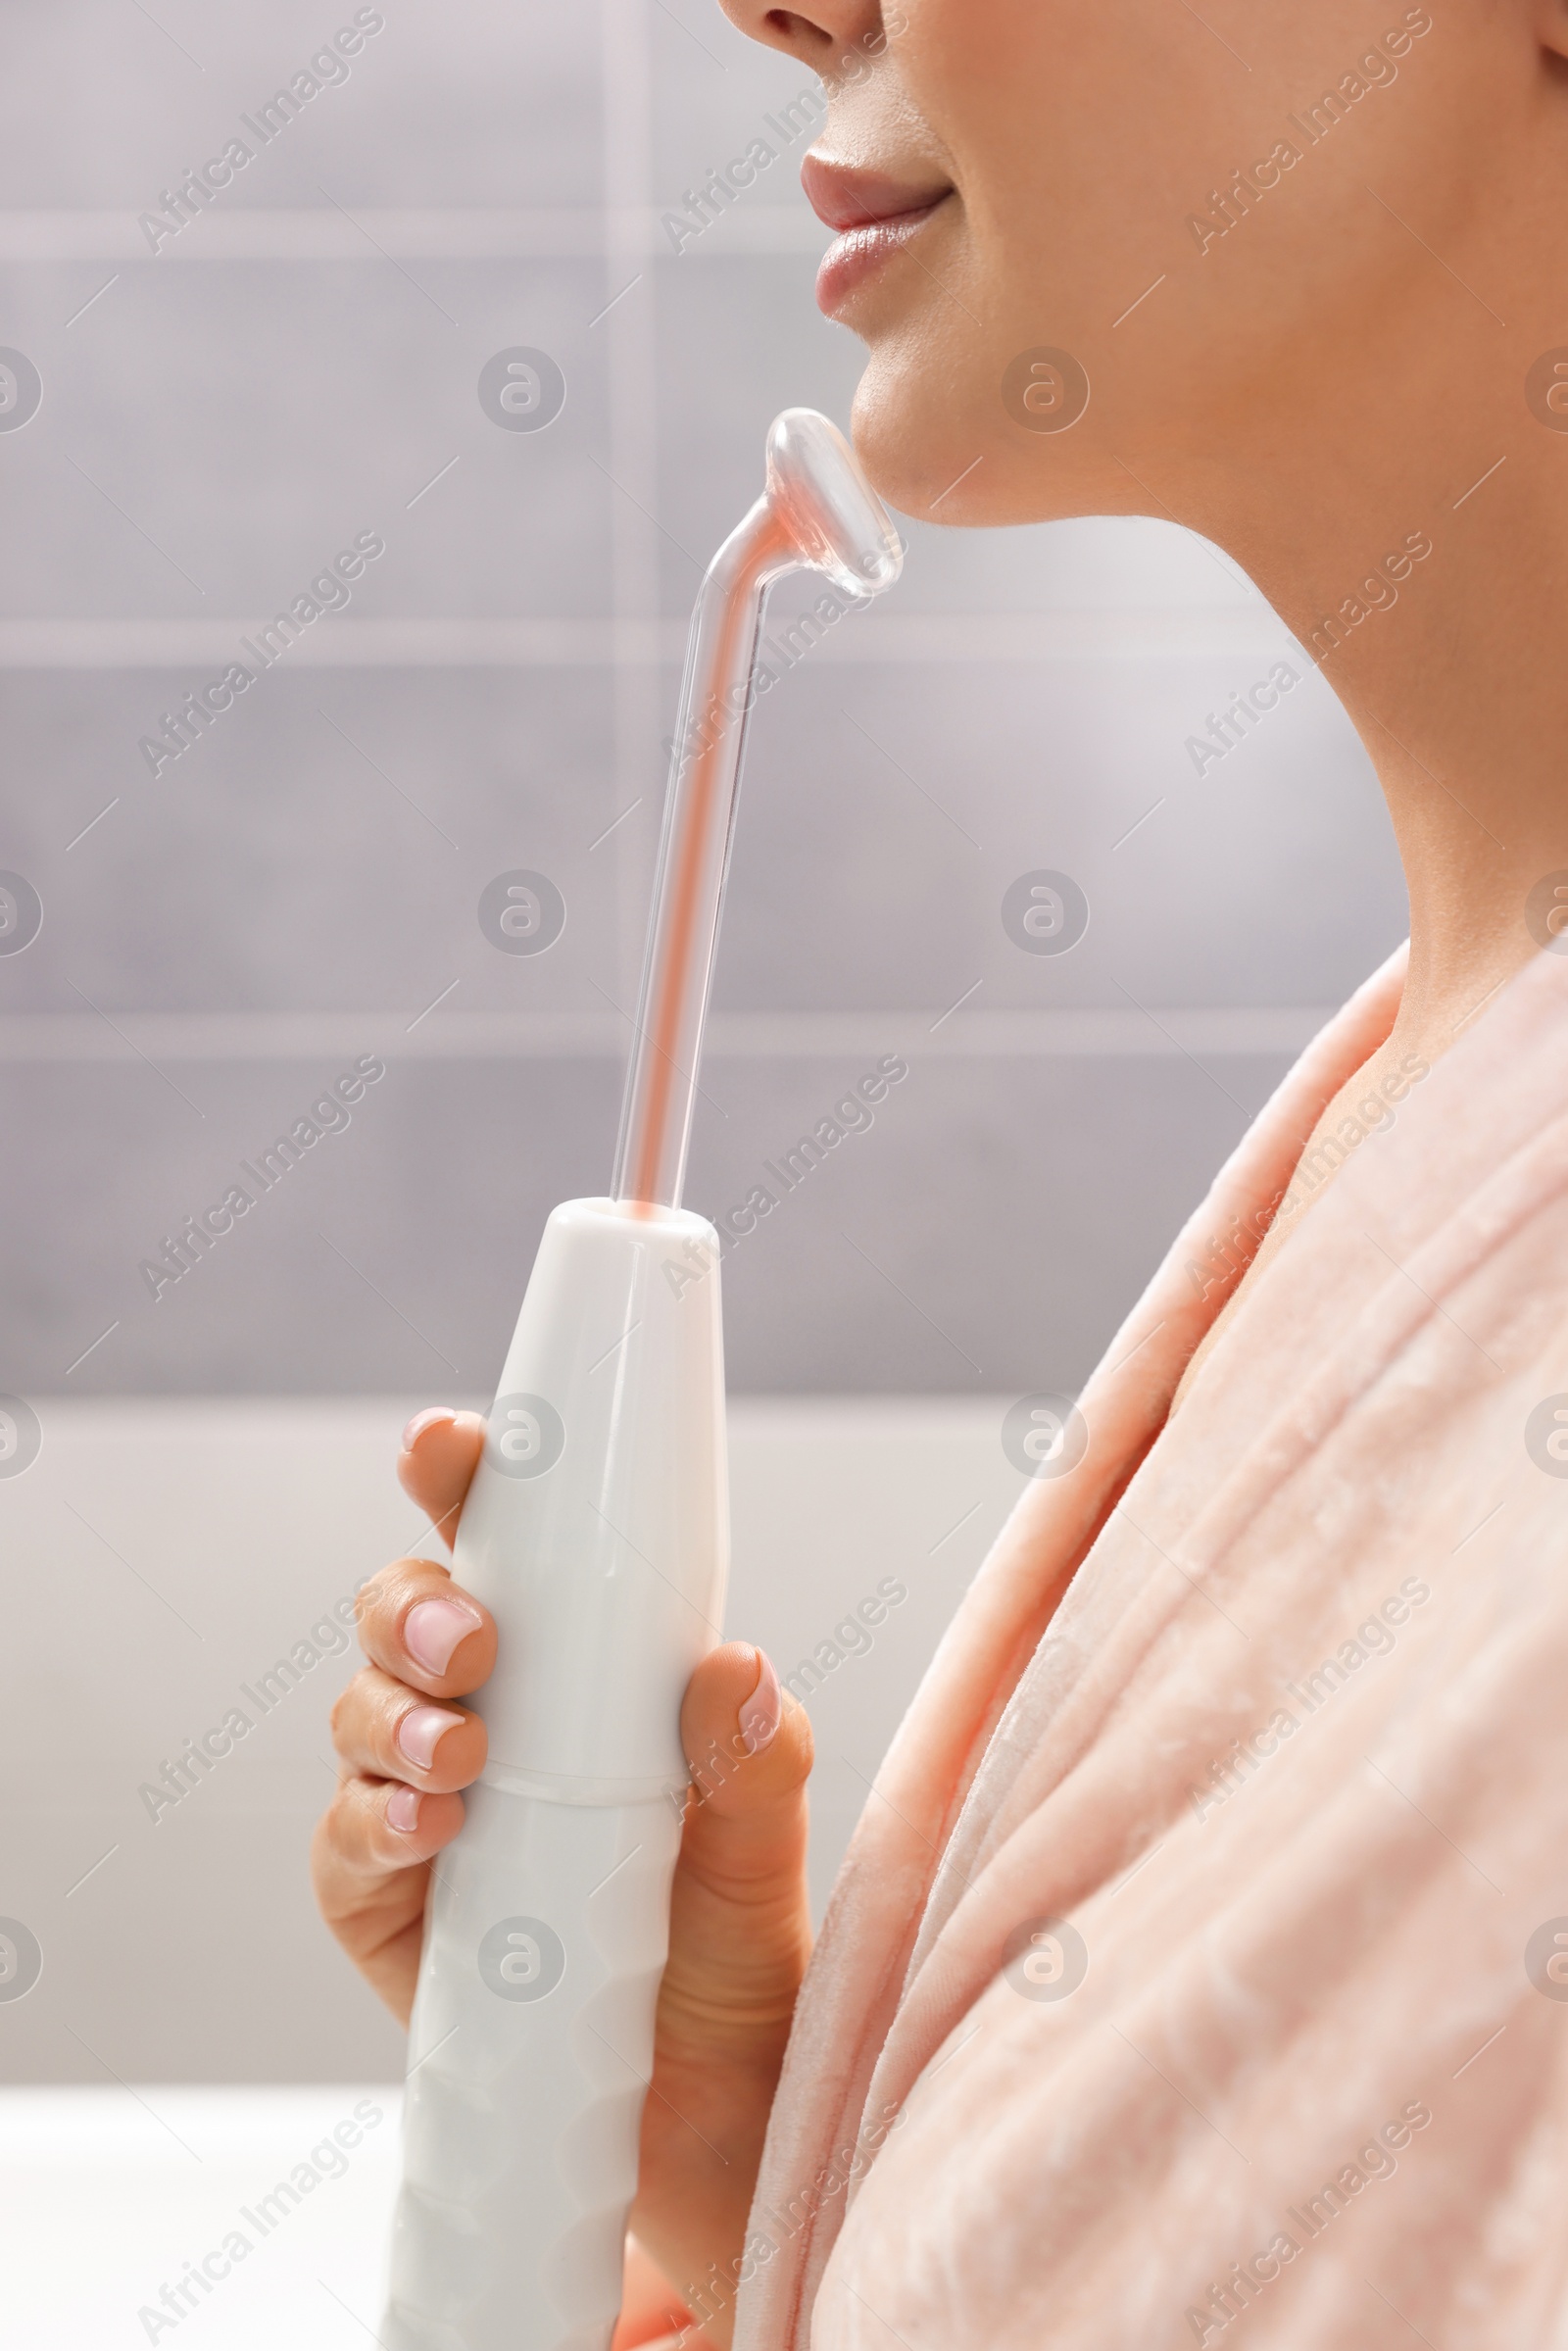 Photo of Woman using high frequency darsonval device in bathroom, closeup